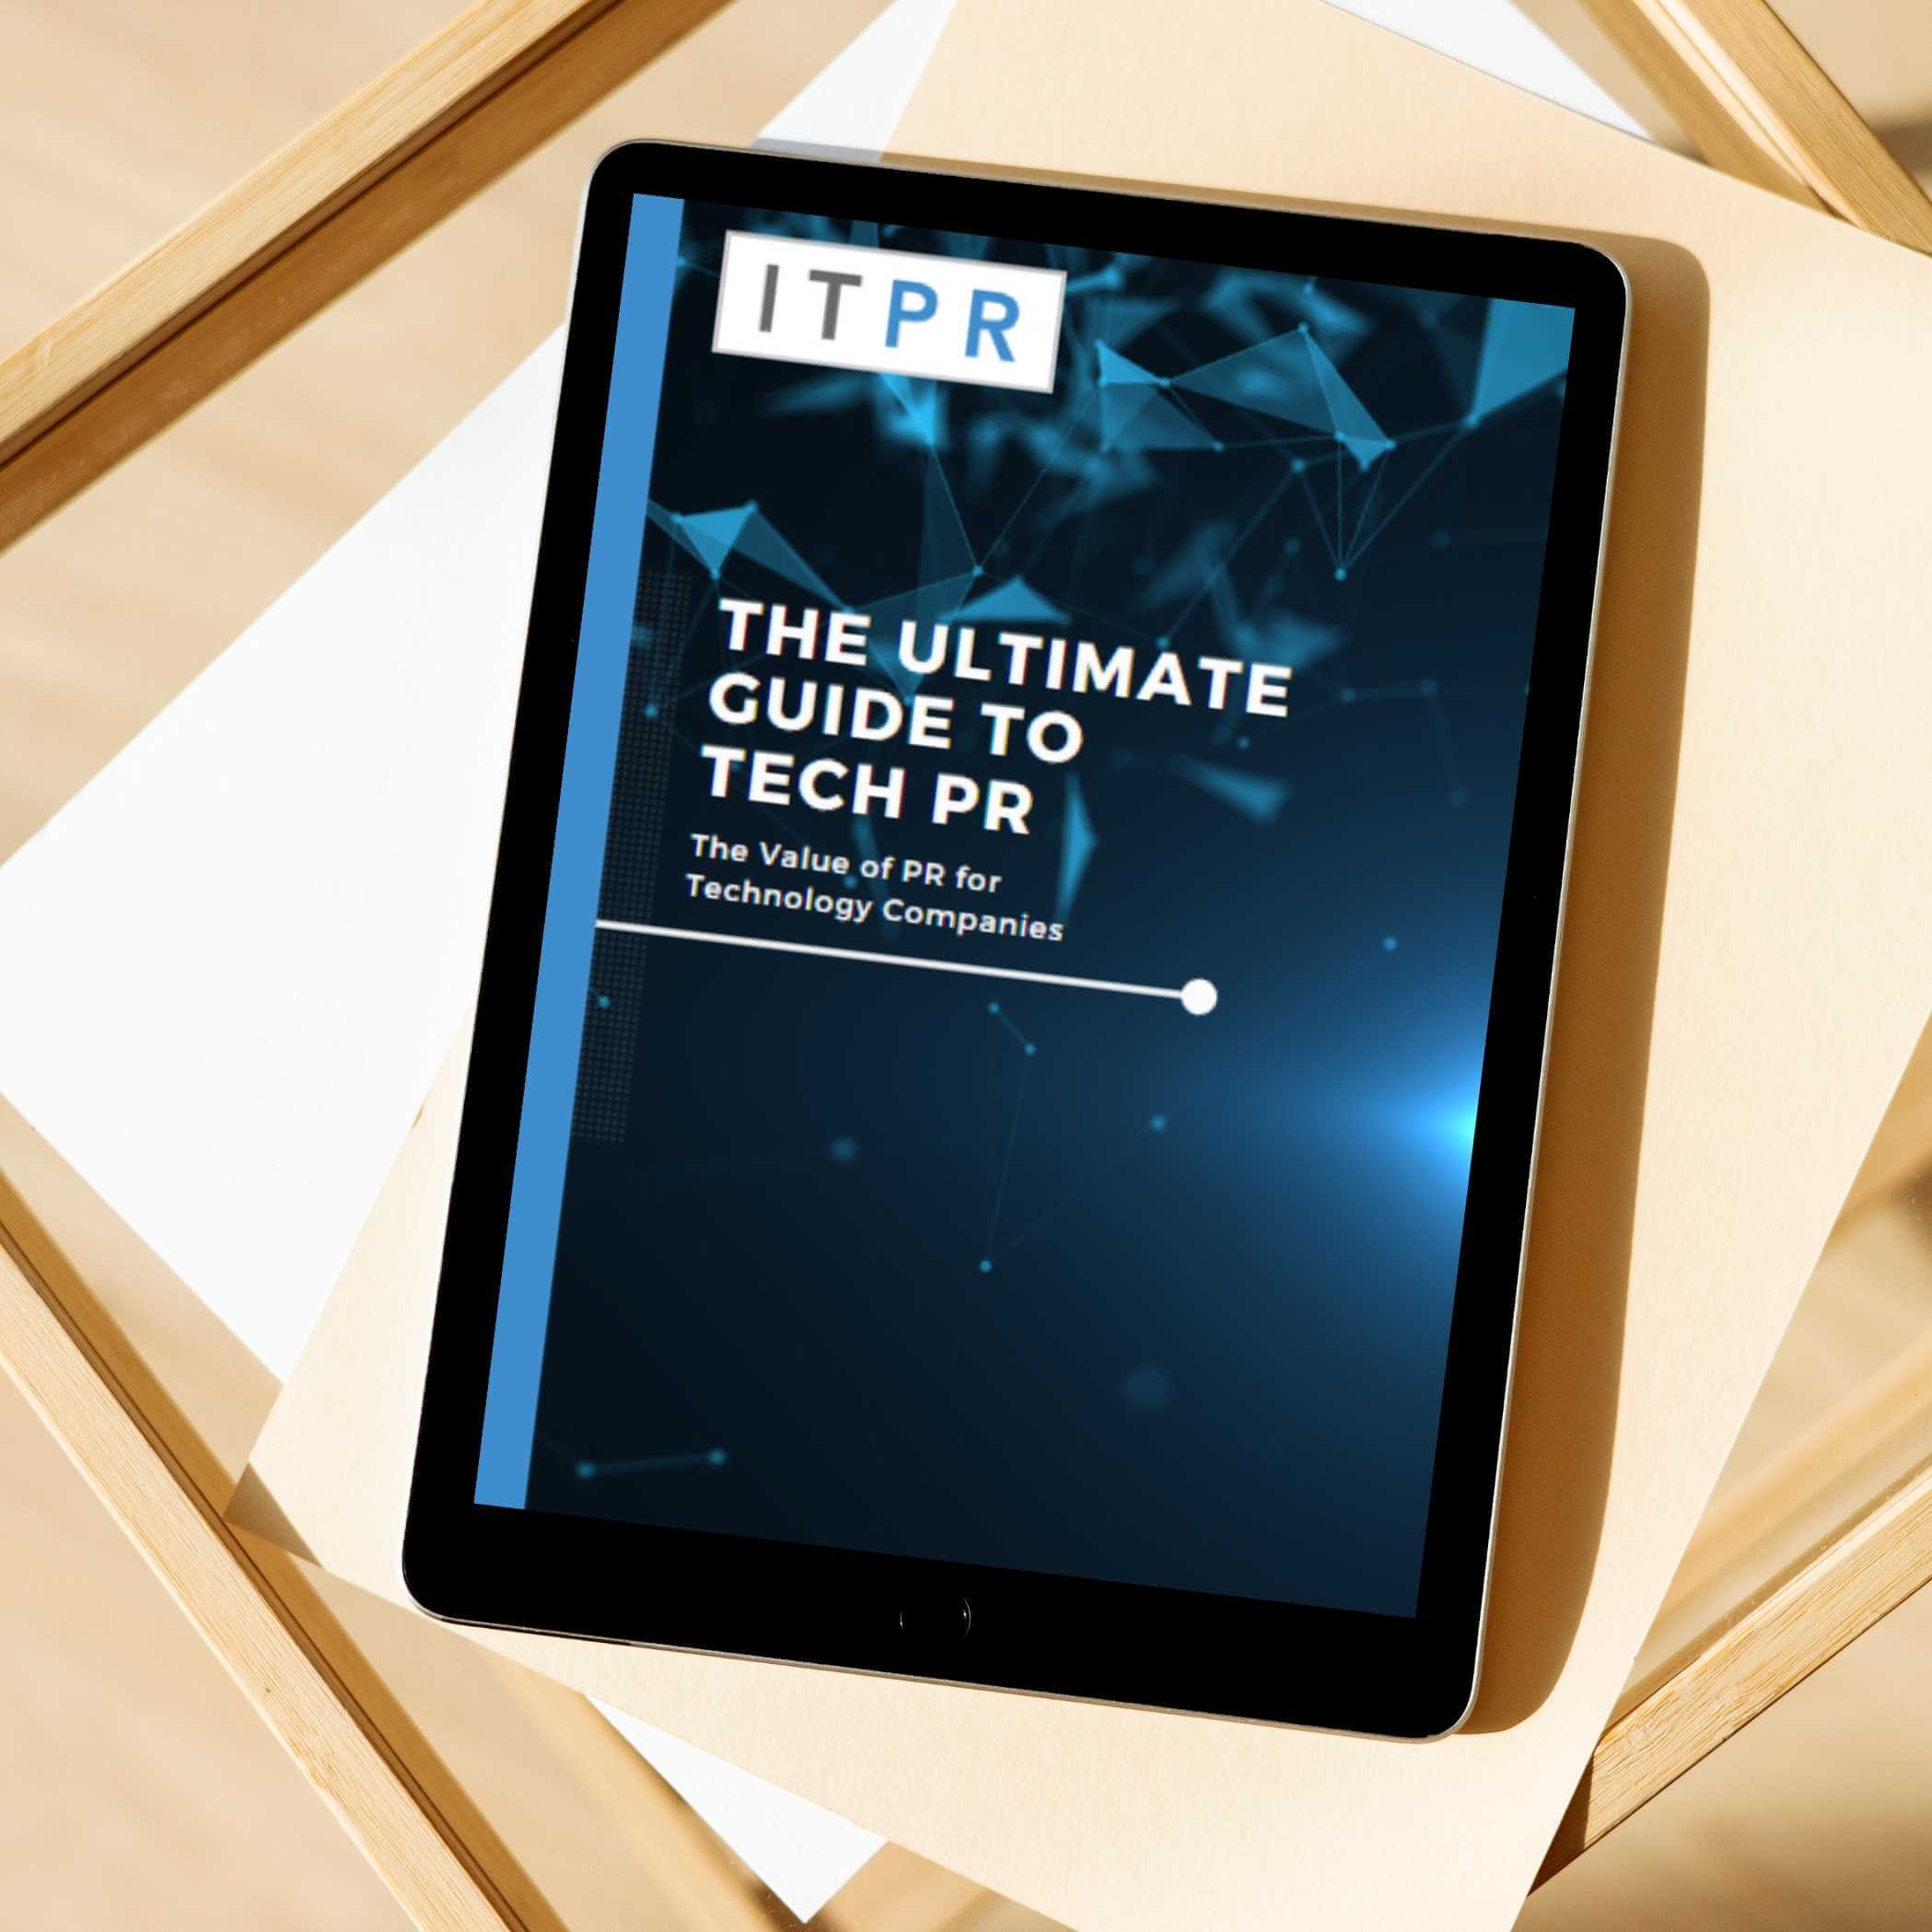 The Ultimate Guide to Tech PR iPad mockup